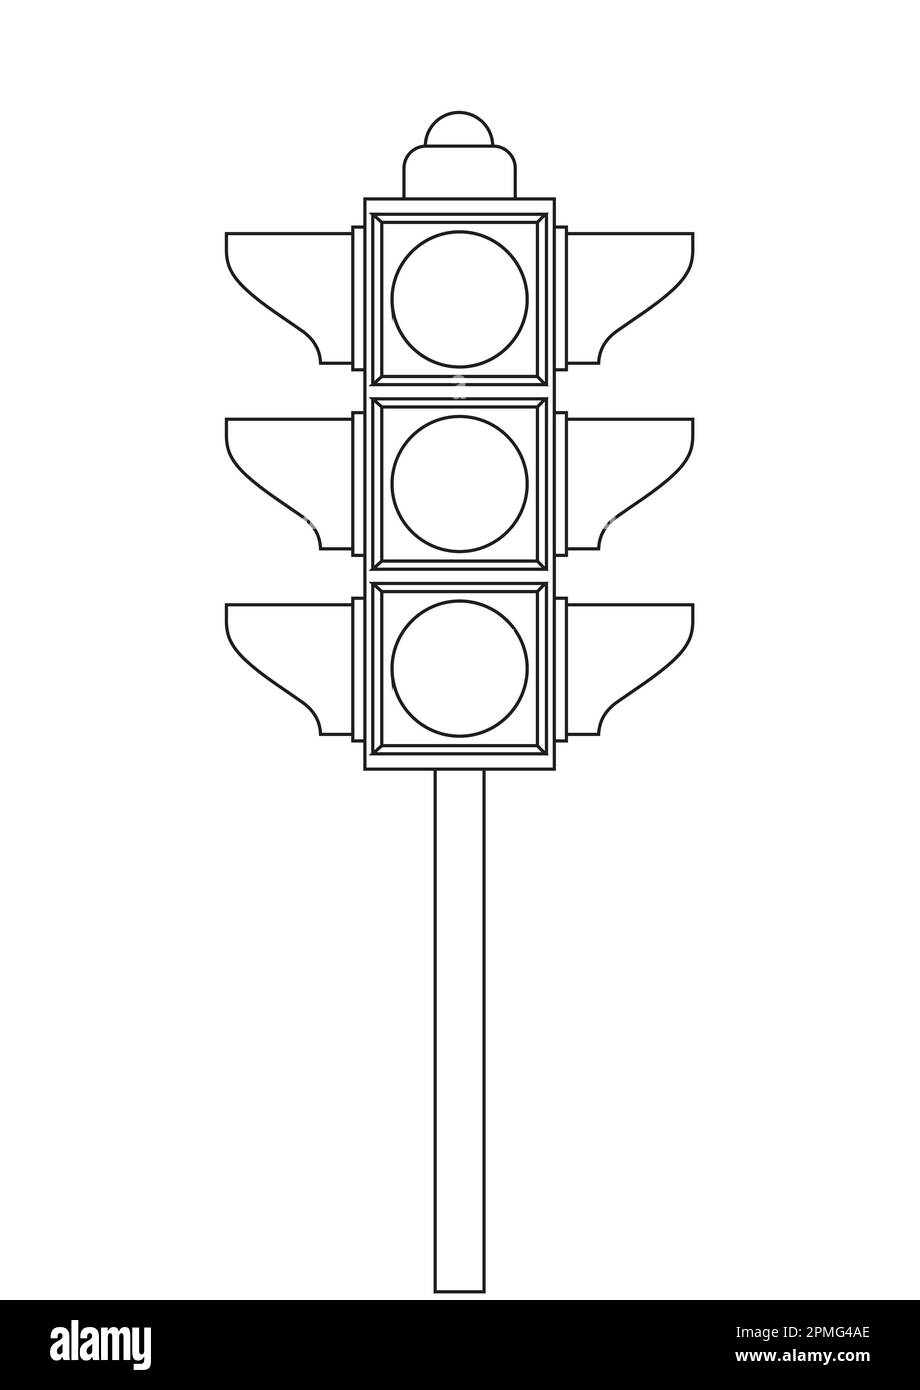 Black and white traffic light clipart. Coloring page of traffic light Stock Vector